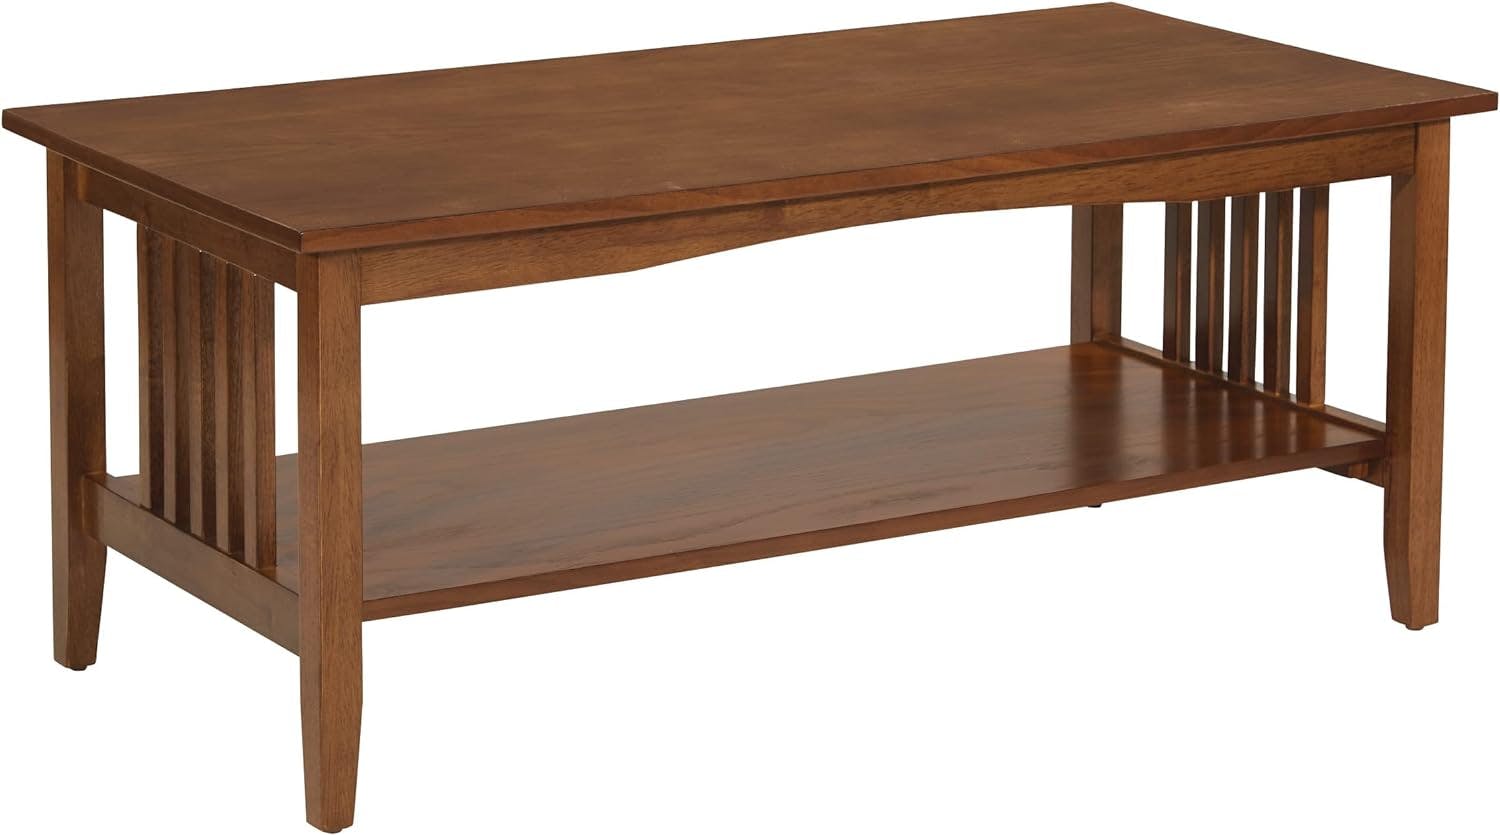 Sierra Mission 45'' Ash Brown Rectangular Wood Coffee Table with Lower Shelf